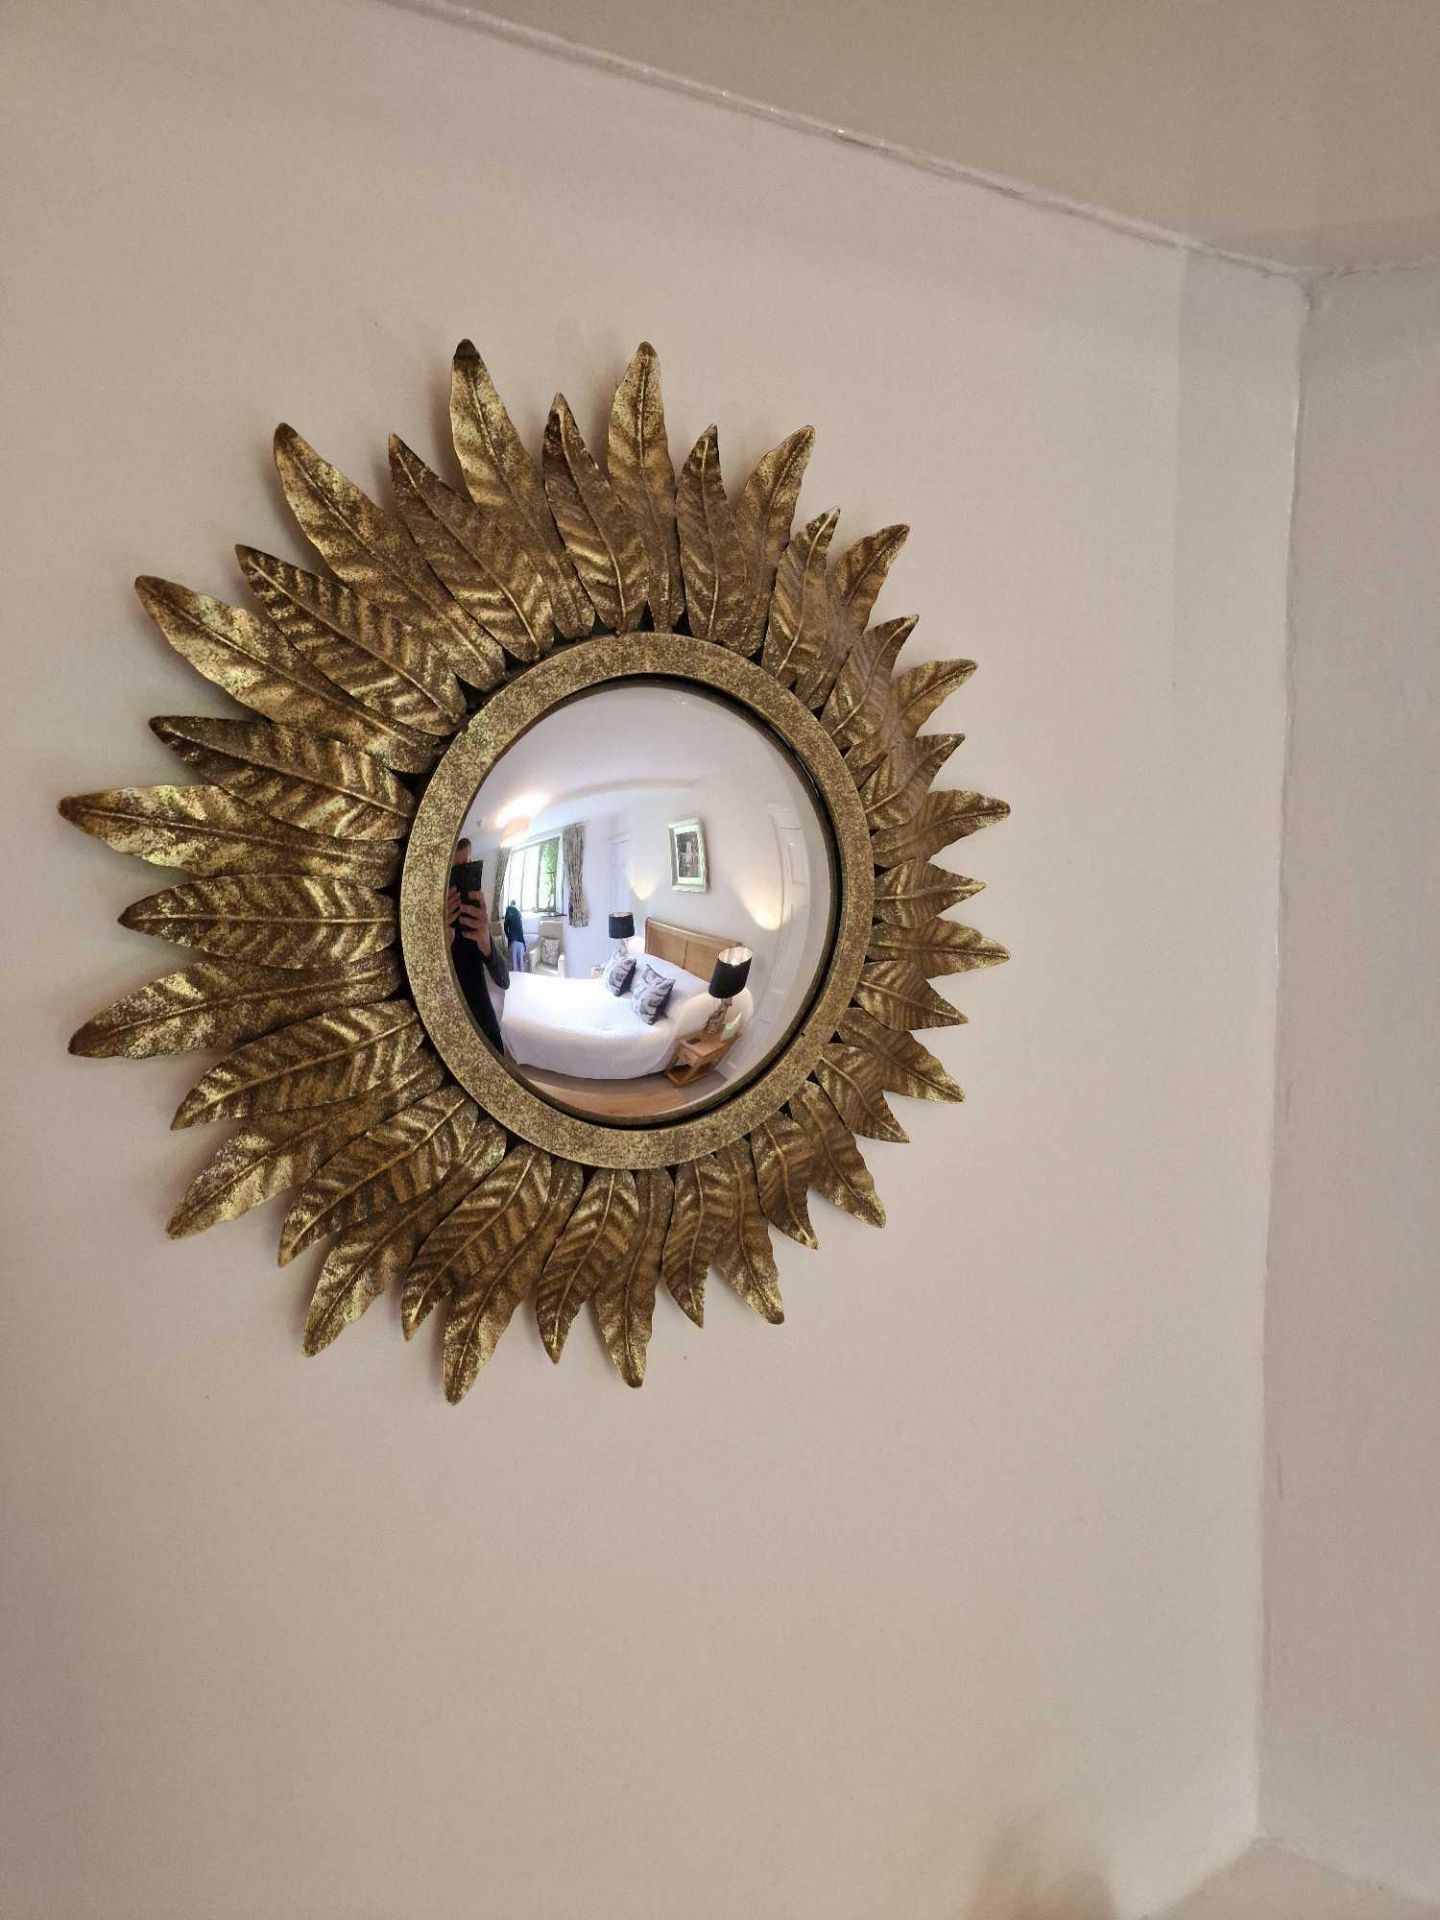 Convex Mirror With Leaf Detail Gold Frame 42 Cm Inspired By Classical Art And Architecture, The